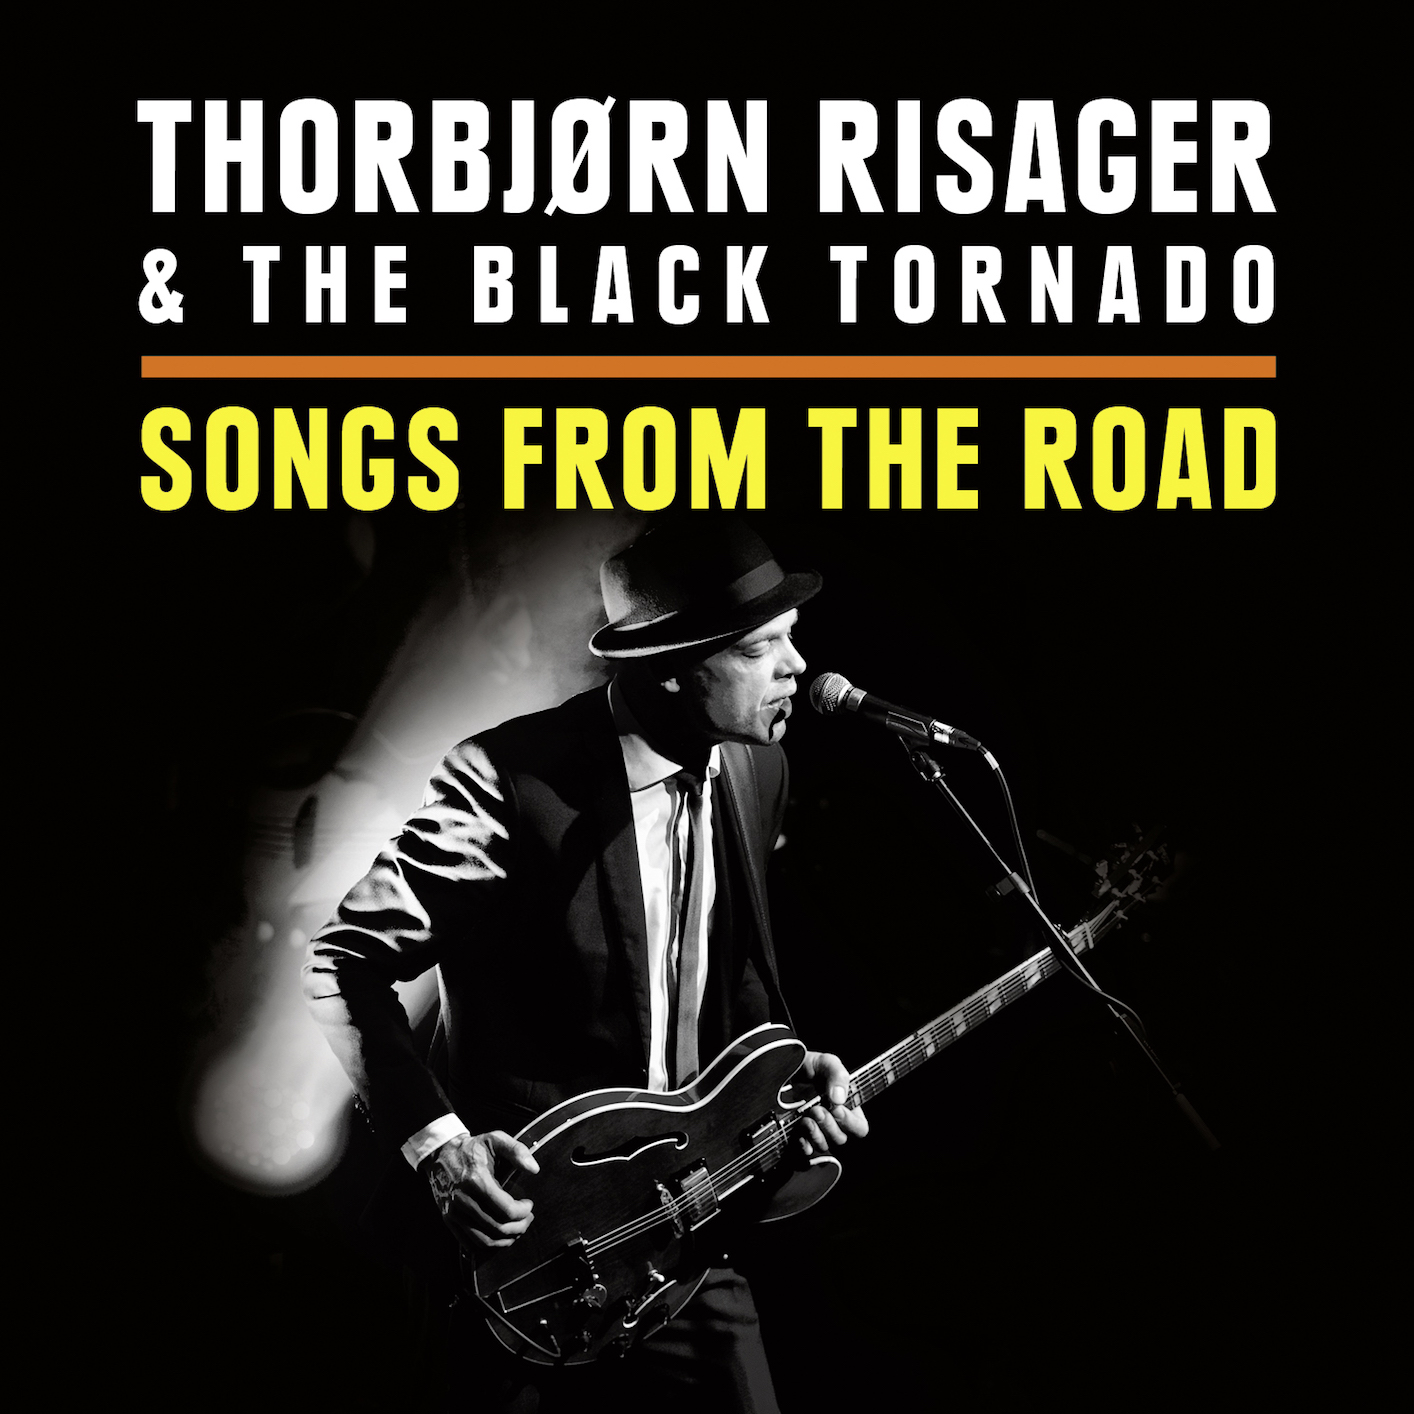 Thorbjorn Risager & The Black Tornado - Songs From The Road (2015) [FLAC 24bit/44,1kHz]